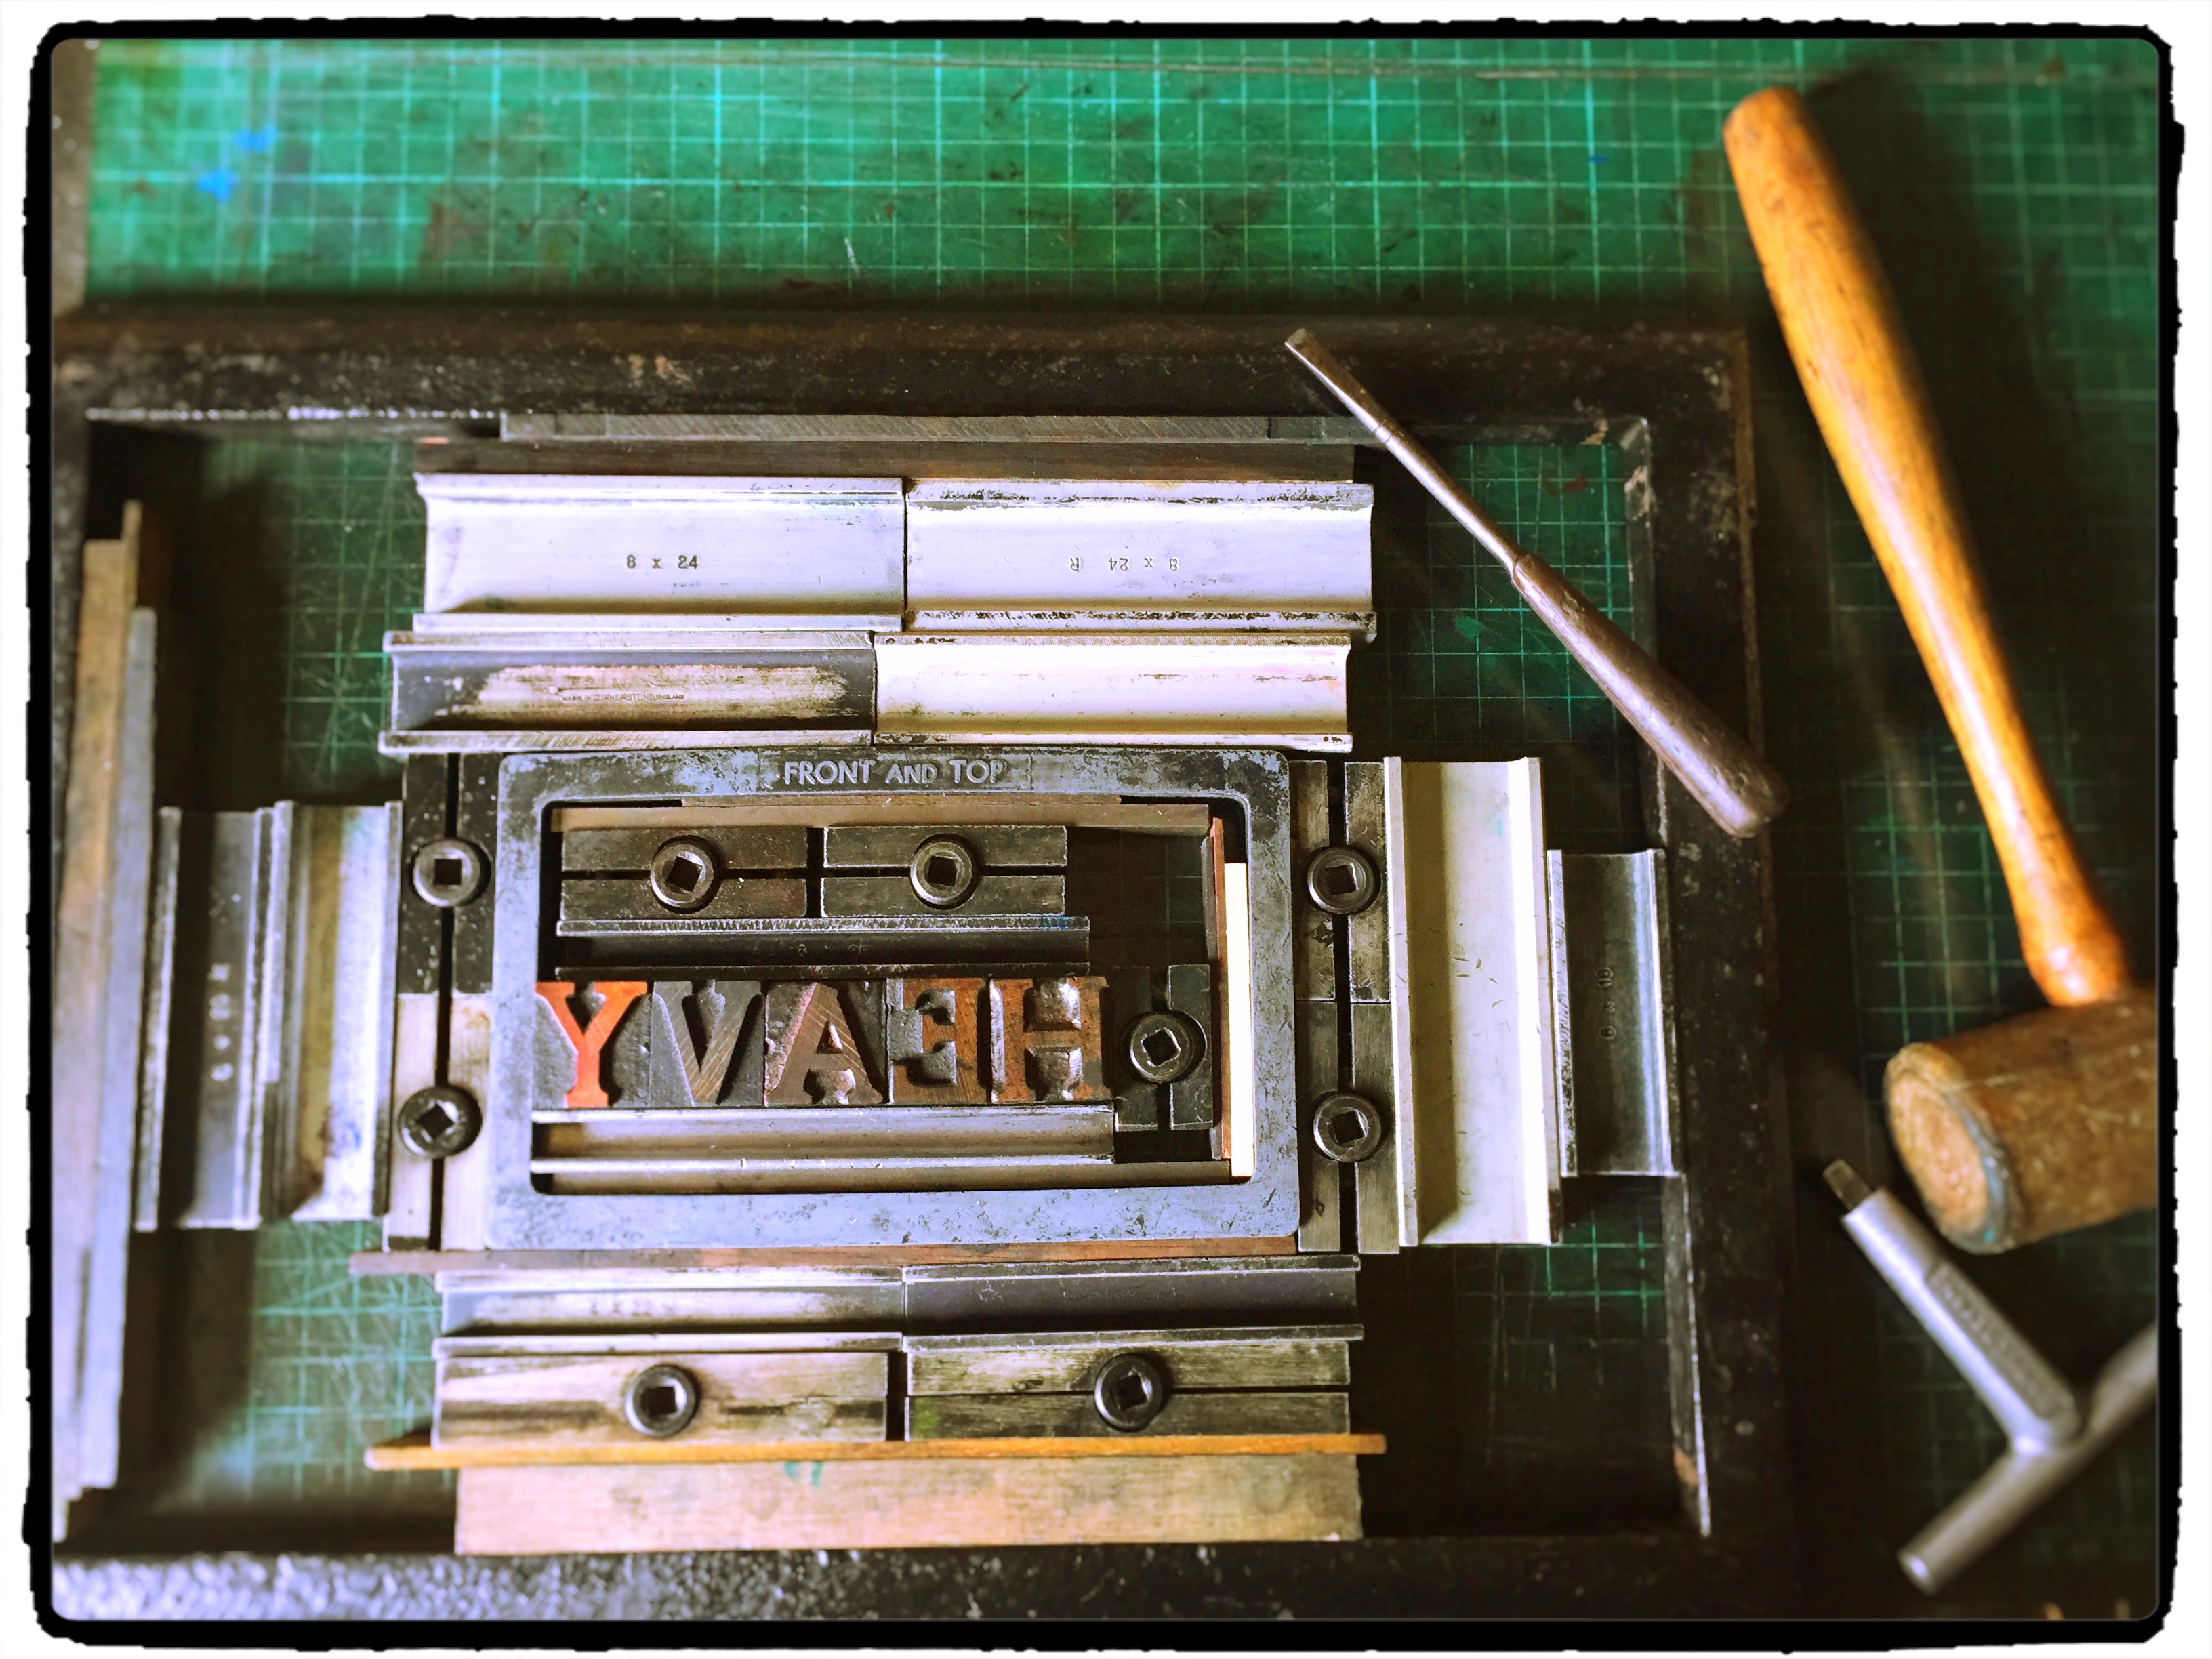 Type, furniture, quoins and chase